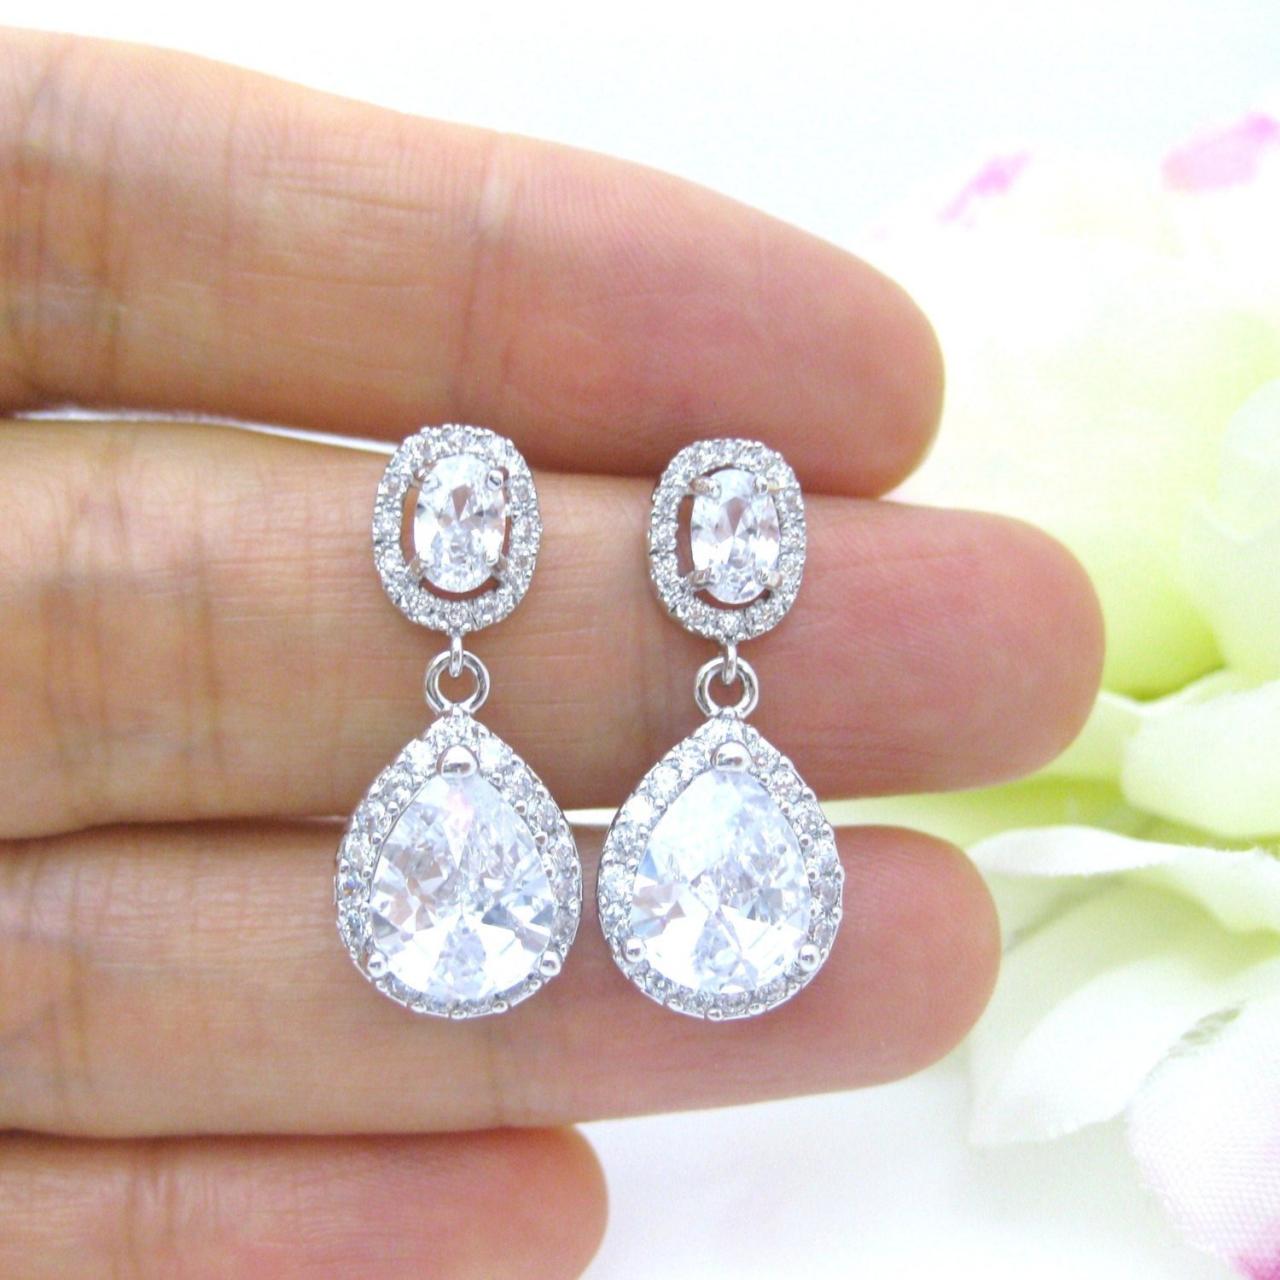 Bridal Crystal Earrings Wedding Jewelry Cubic Zirconia Teardrop Earrings Bridal Teardrop Earrings Bridesmaid Gift Sparky Earrings (e154)